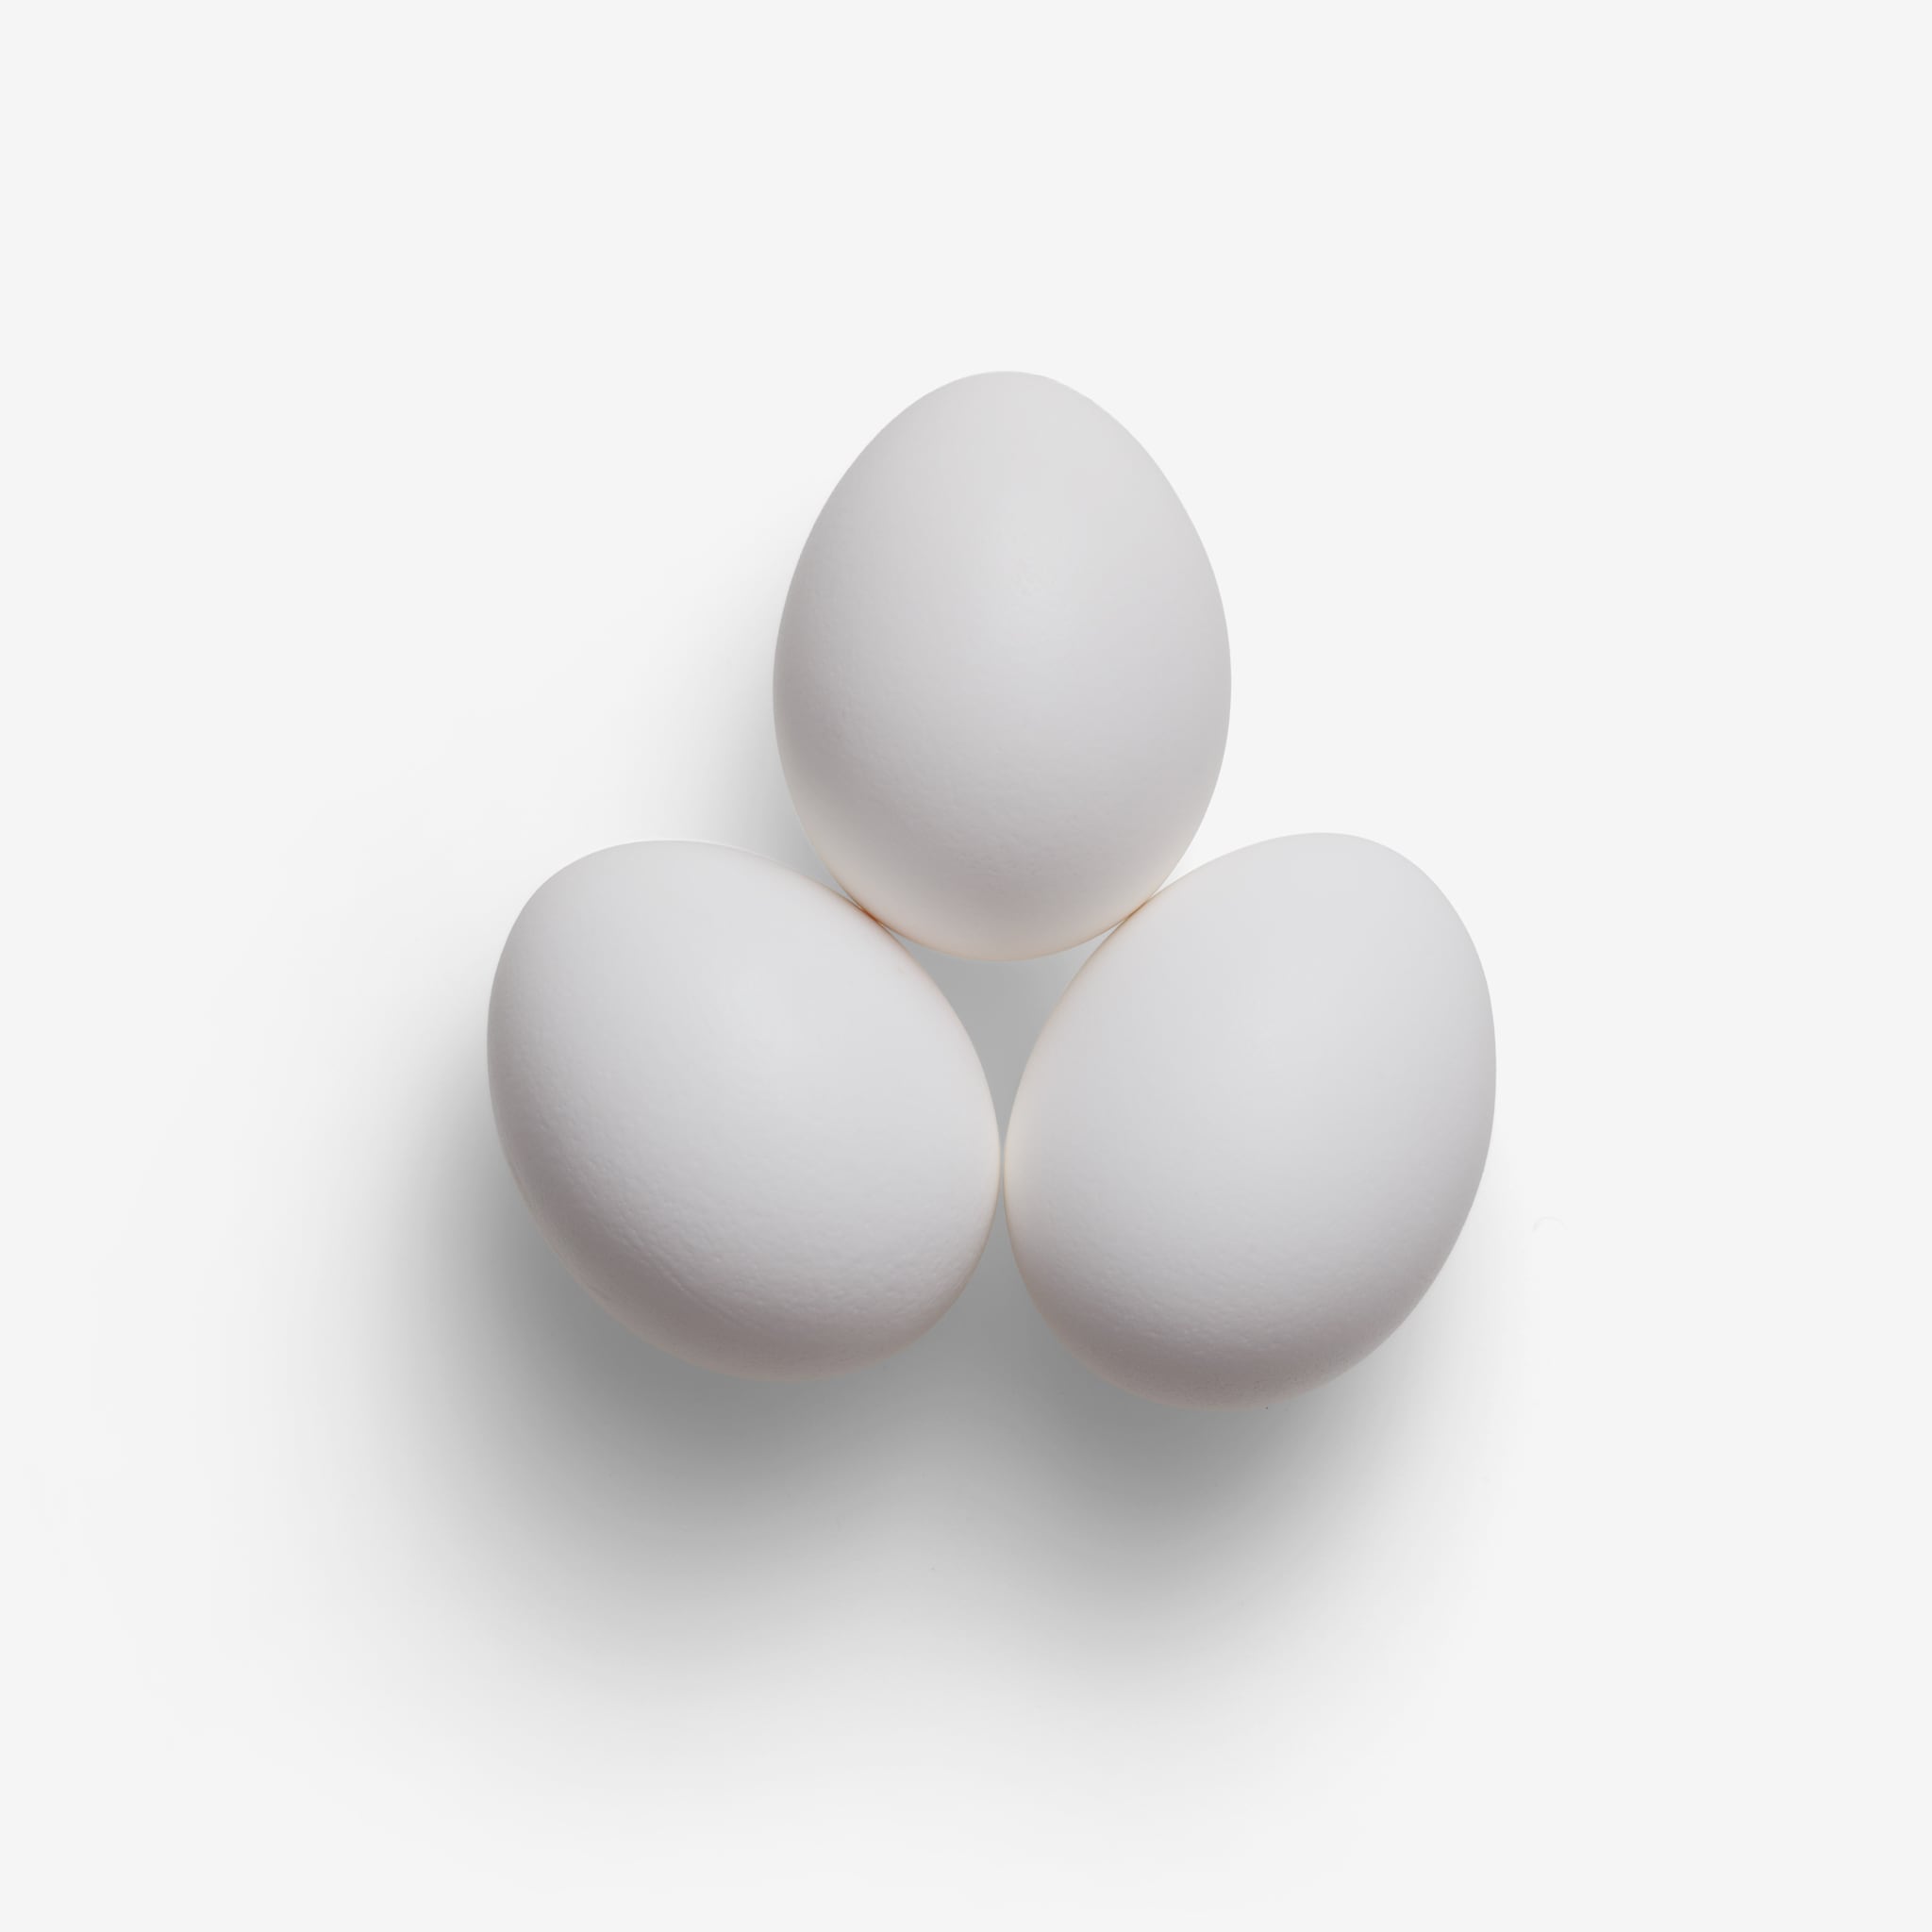 Egg PSD isolated image